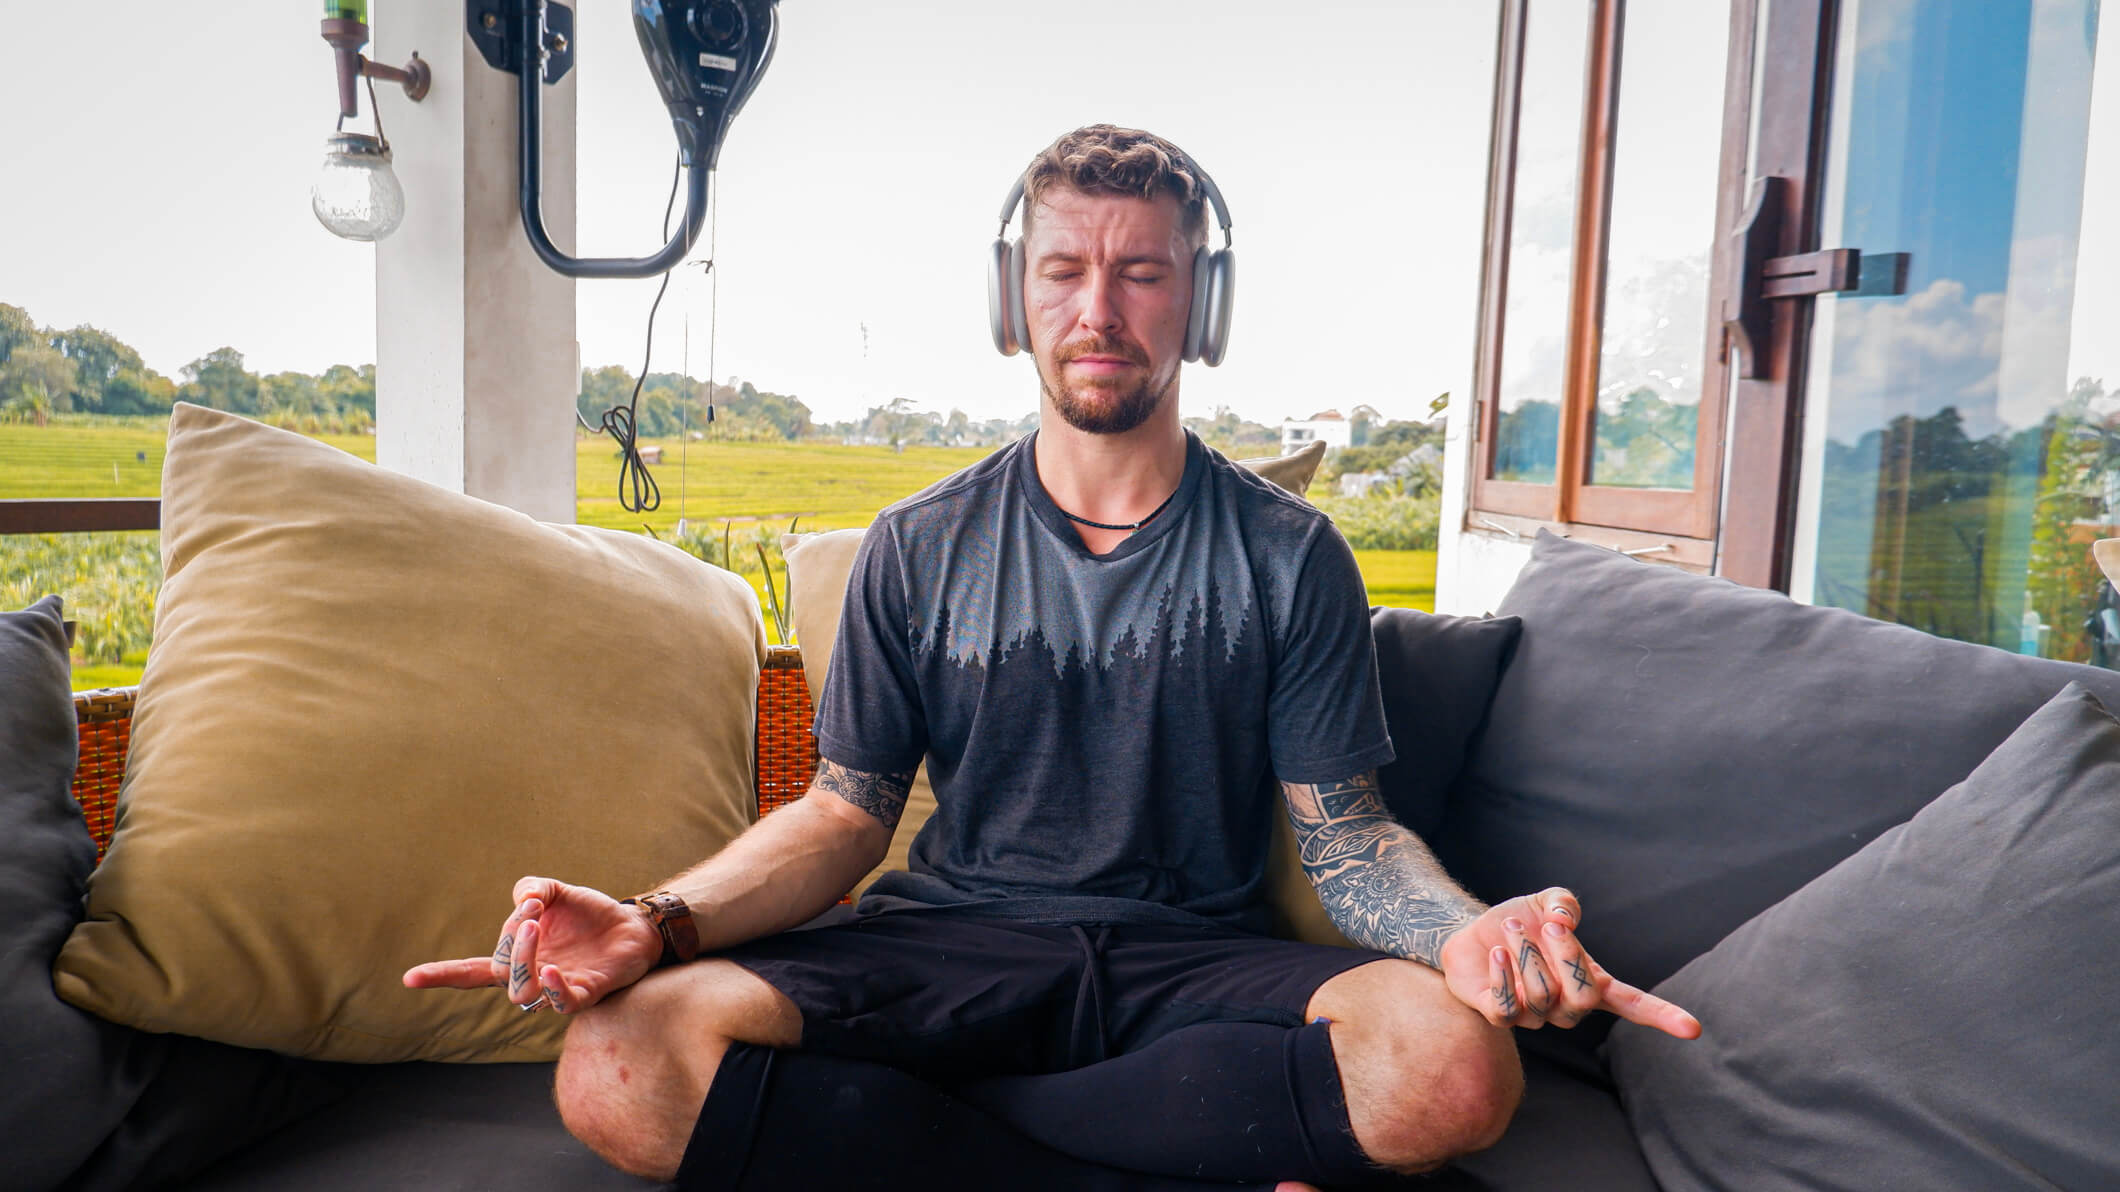 will wearing over the ear headphones sitting in a mediation position on a balcony with rice fields in the background to recover from travel burnout